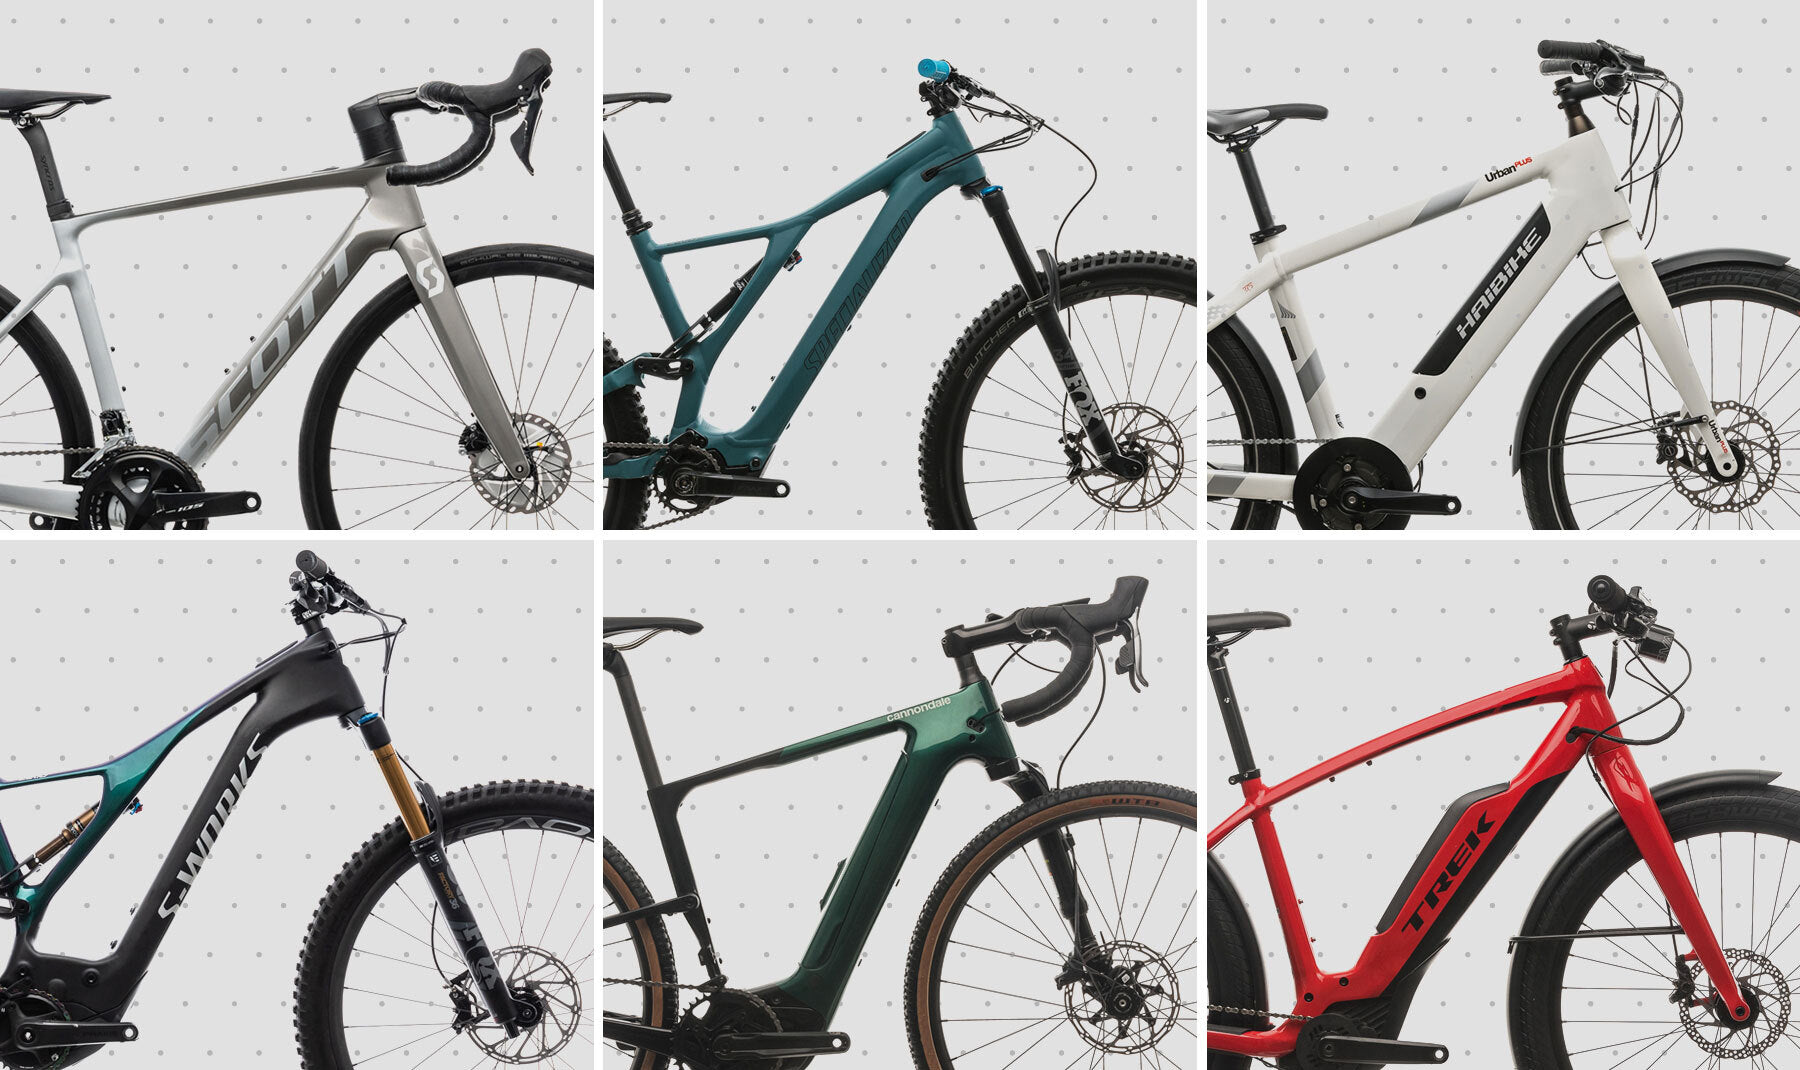 What is an e-bike and what makes it different?